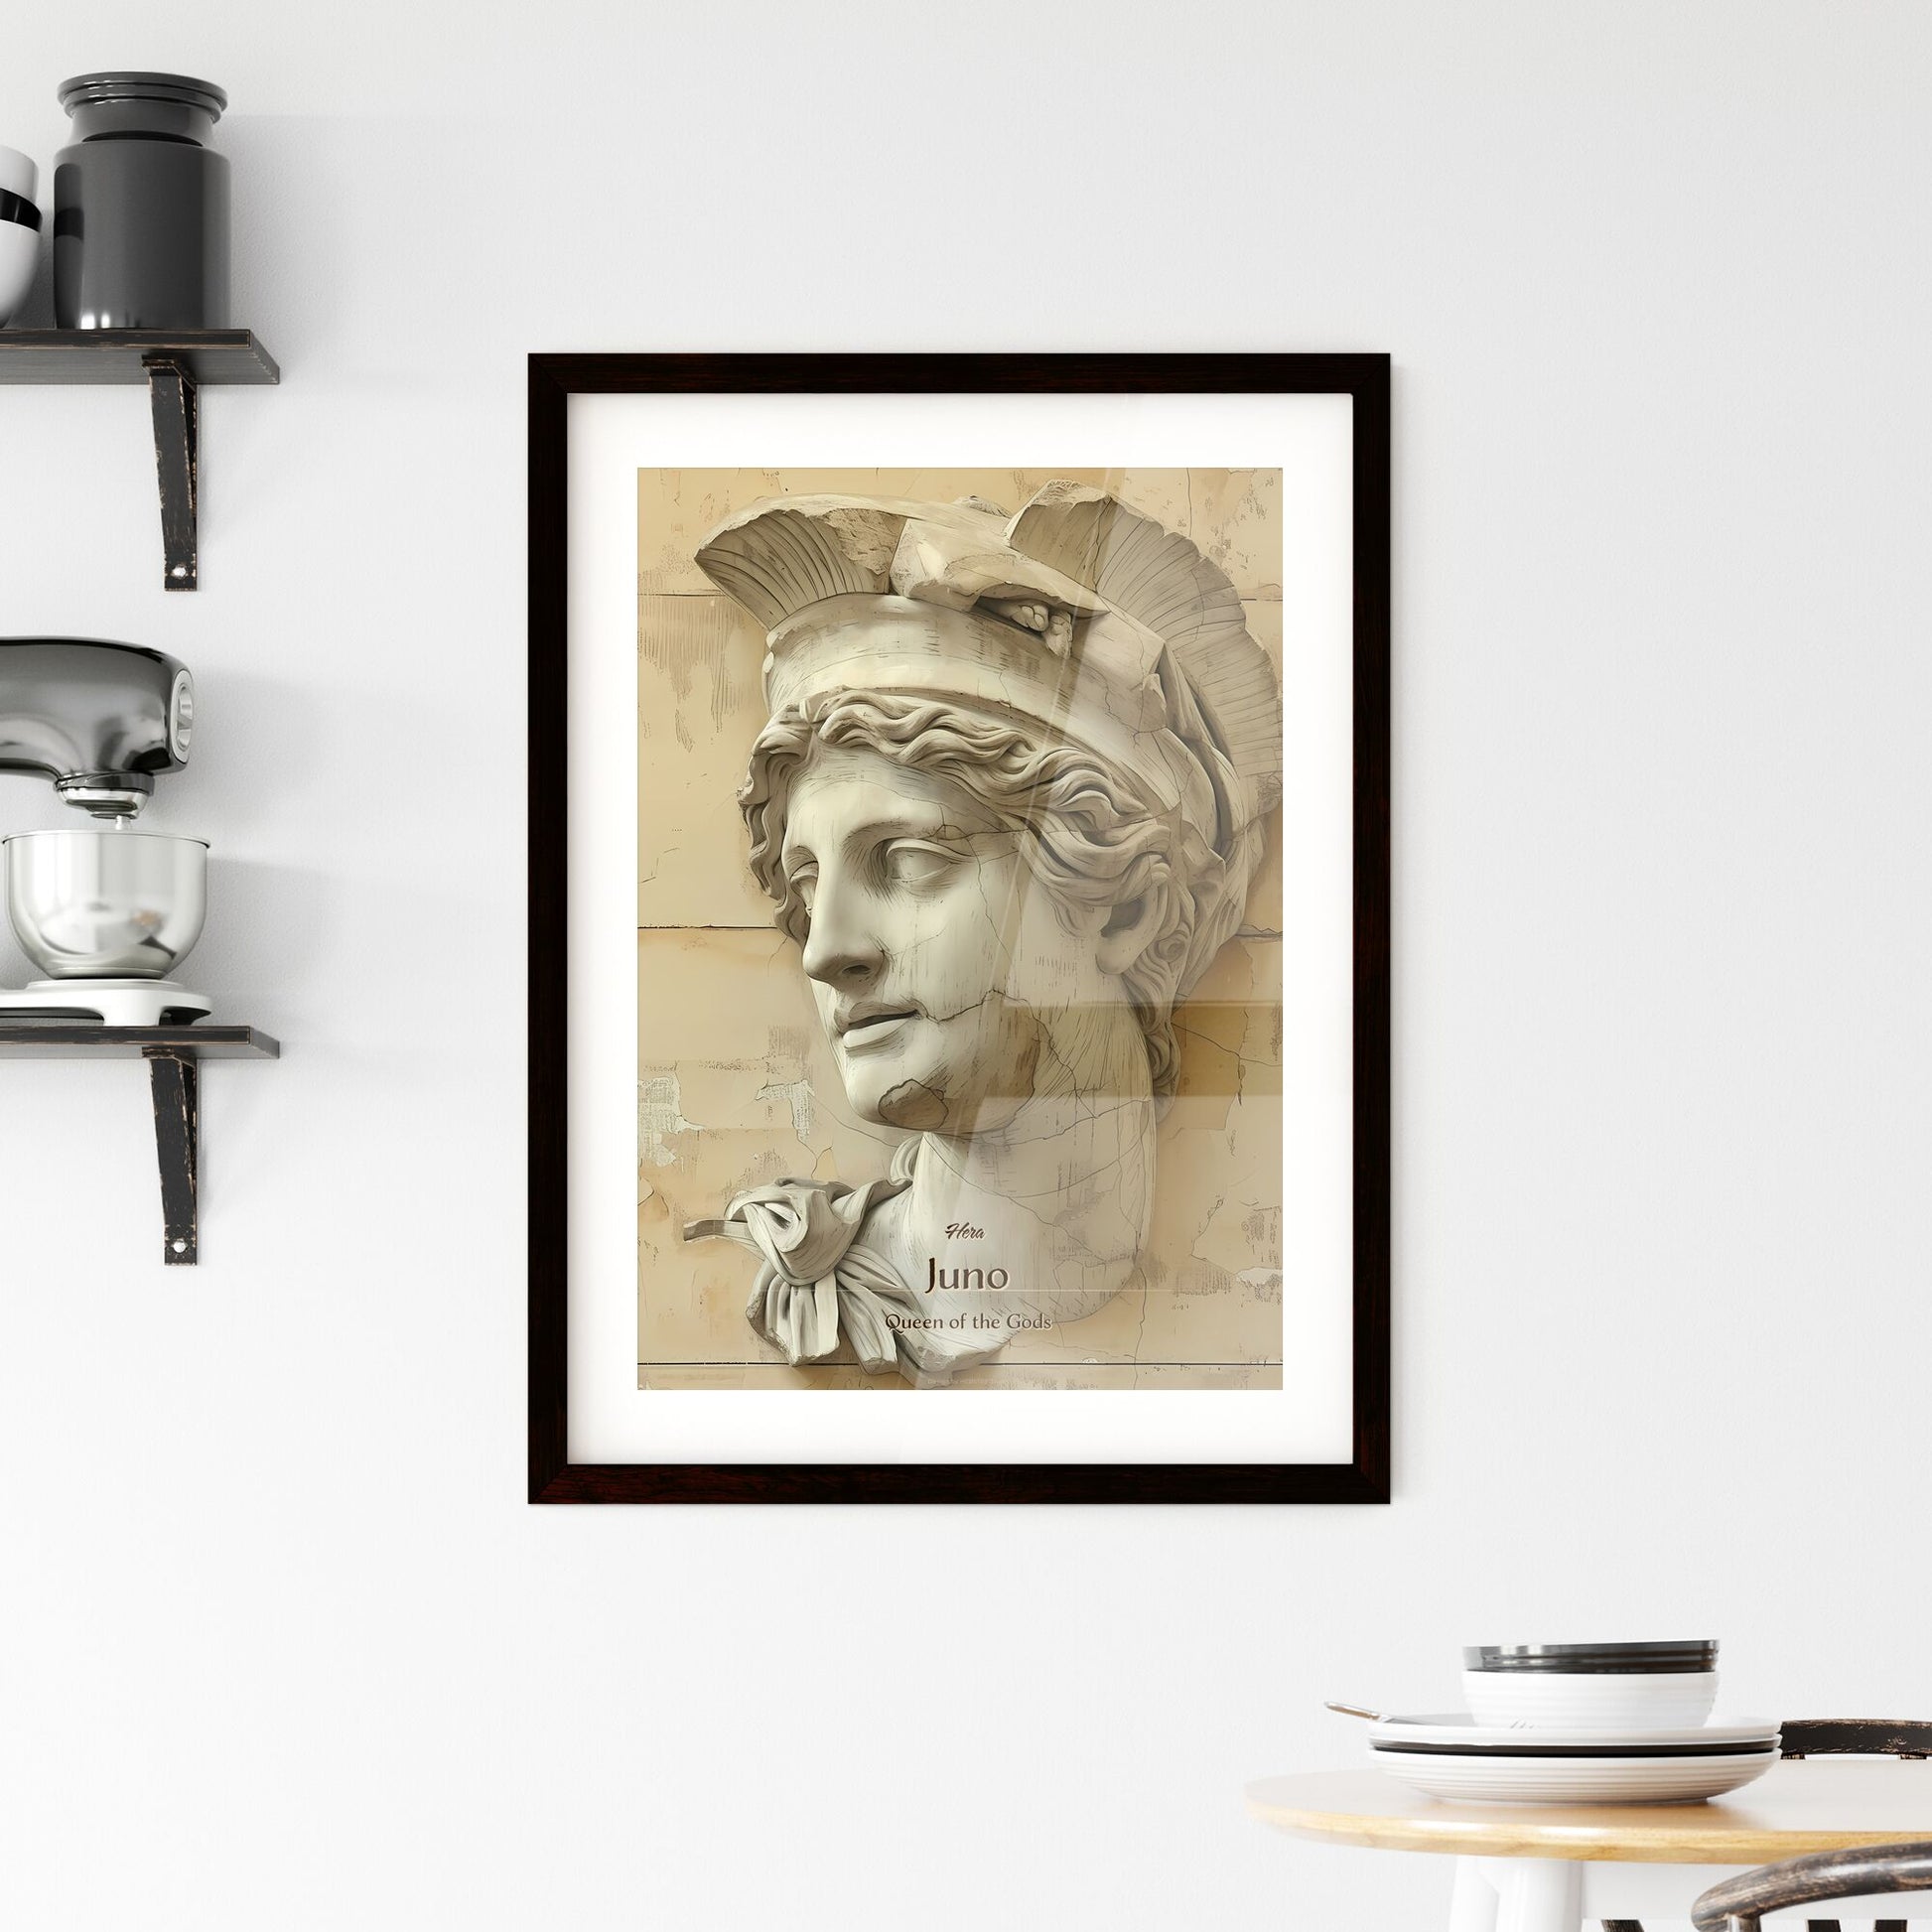 Hera, Juno, Queen of the Gods, A Poster of a statue of a woman Default Title